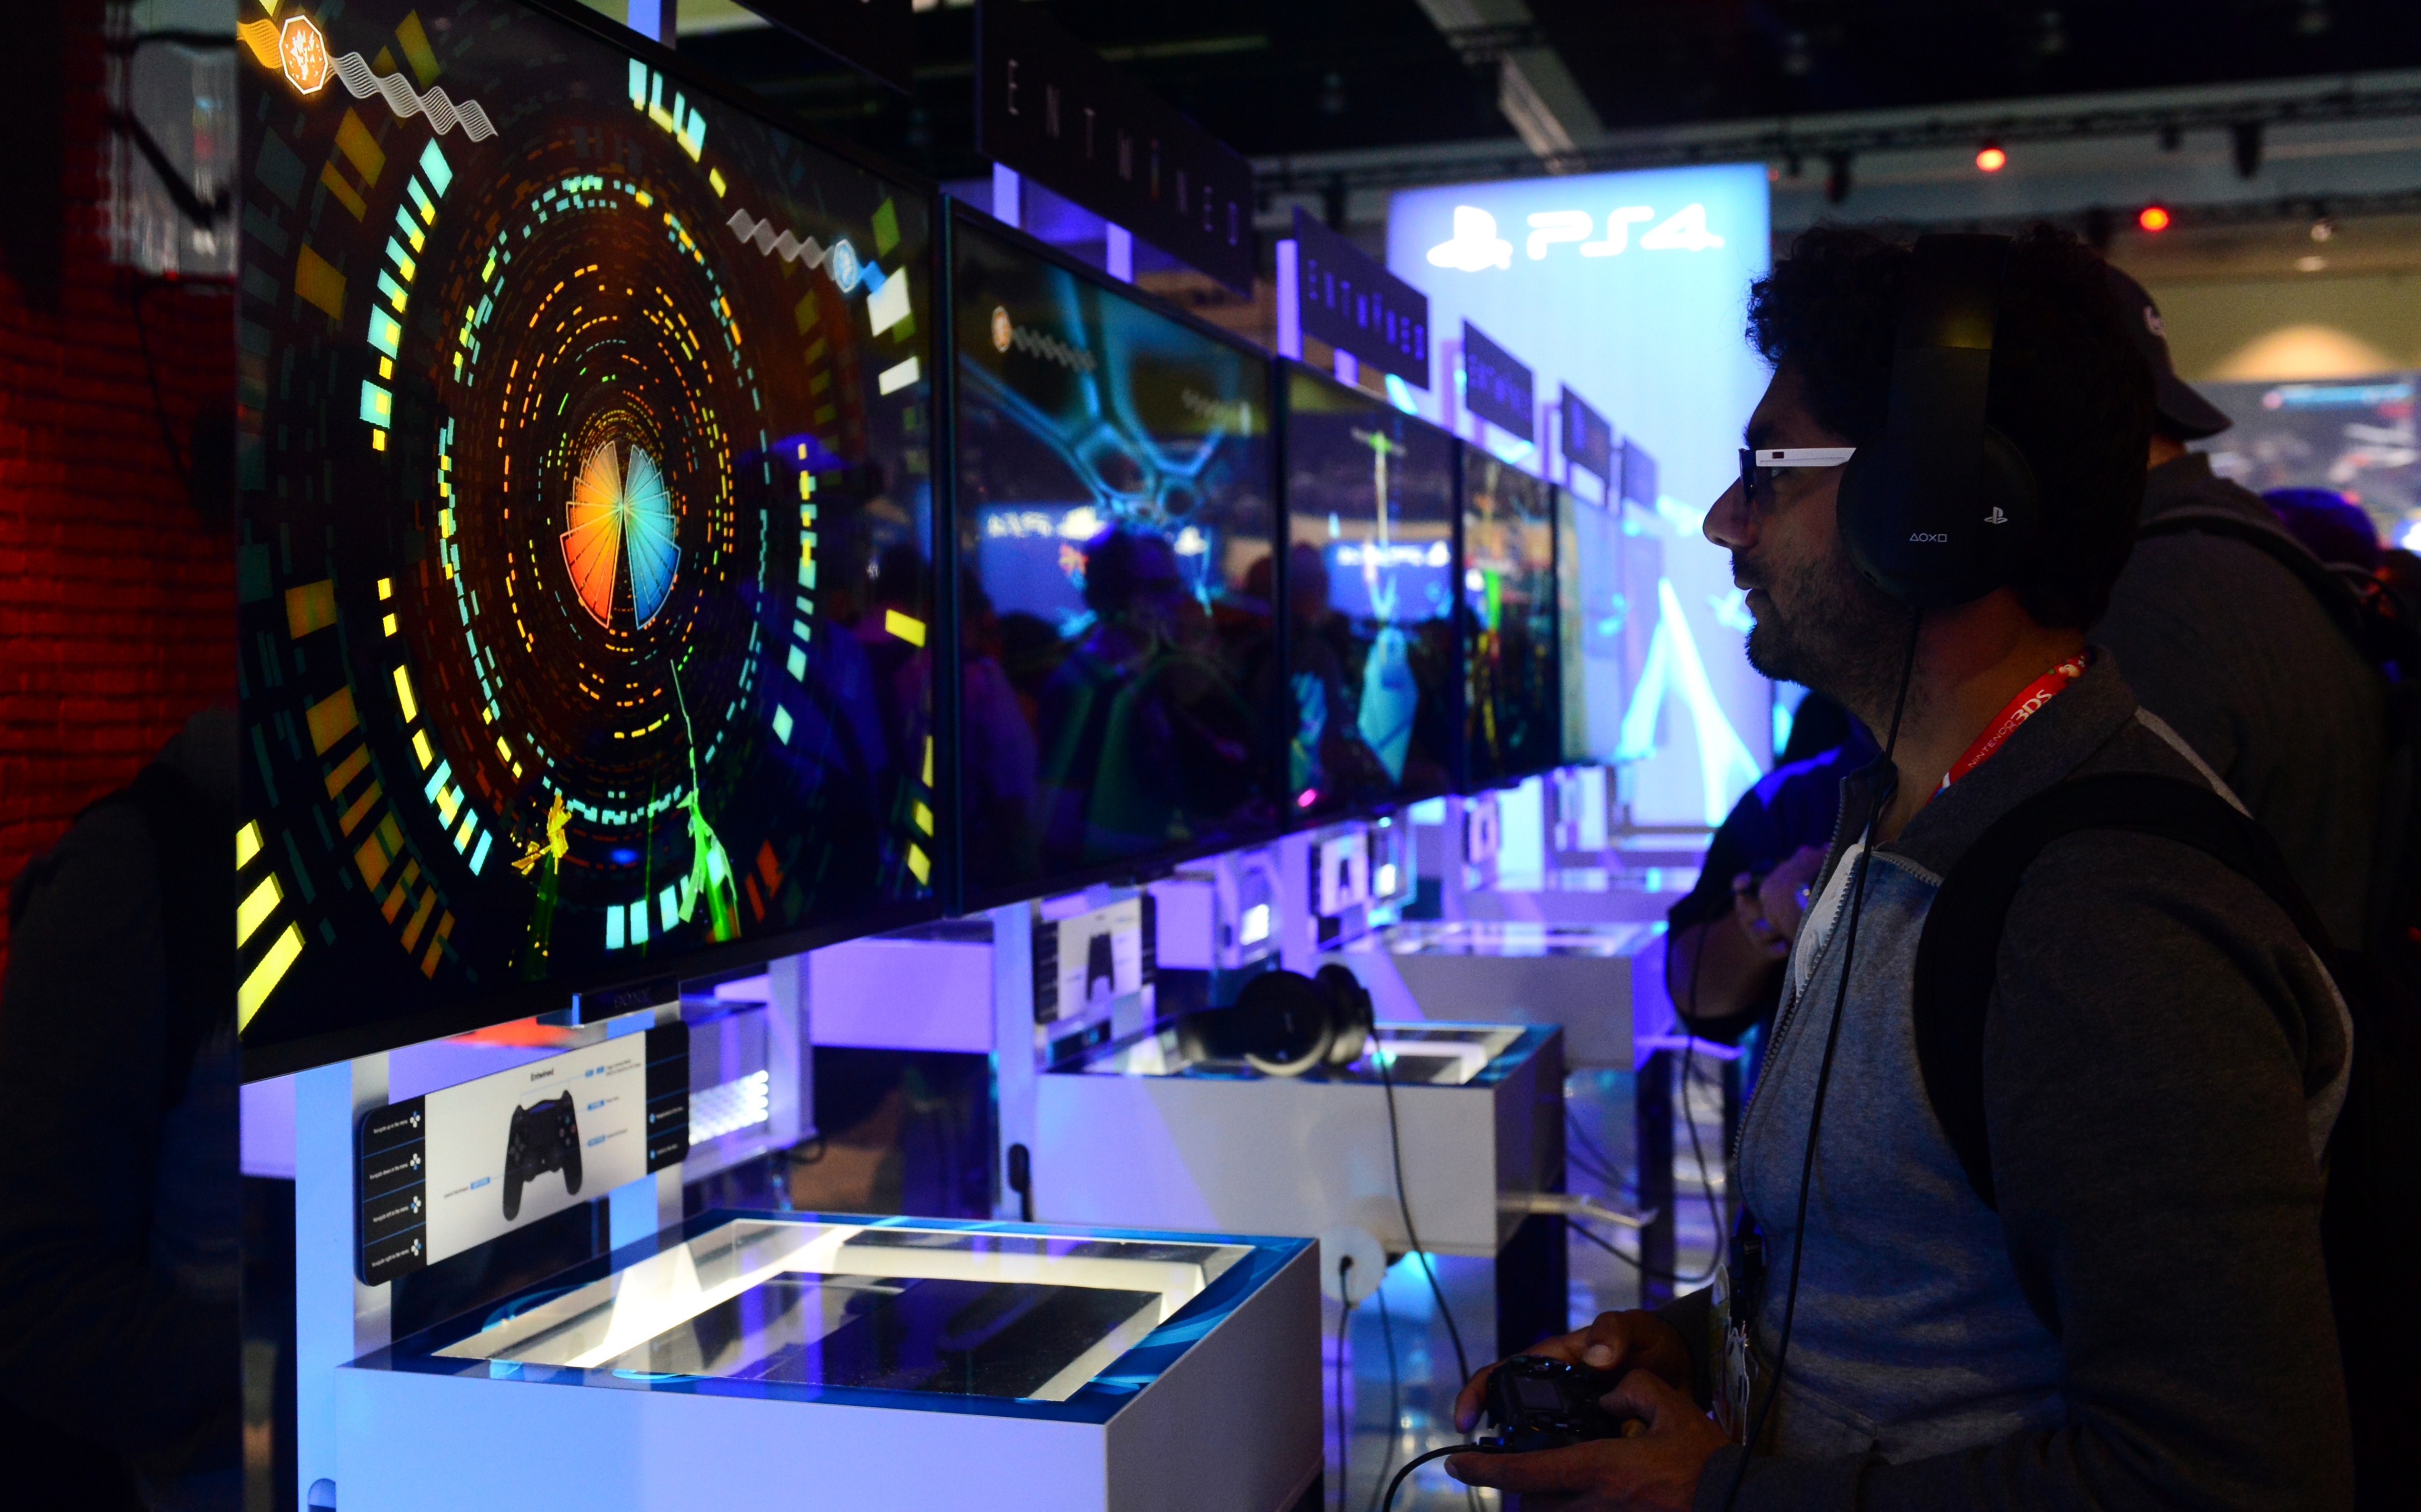 A gamer plays 'Entwined' on Sony's PS4 at annual E3 video game extravaganza in Los Angeles on June 10, 2014.